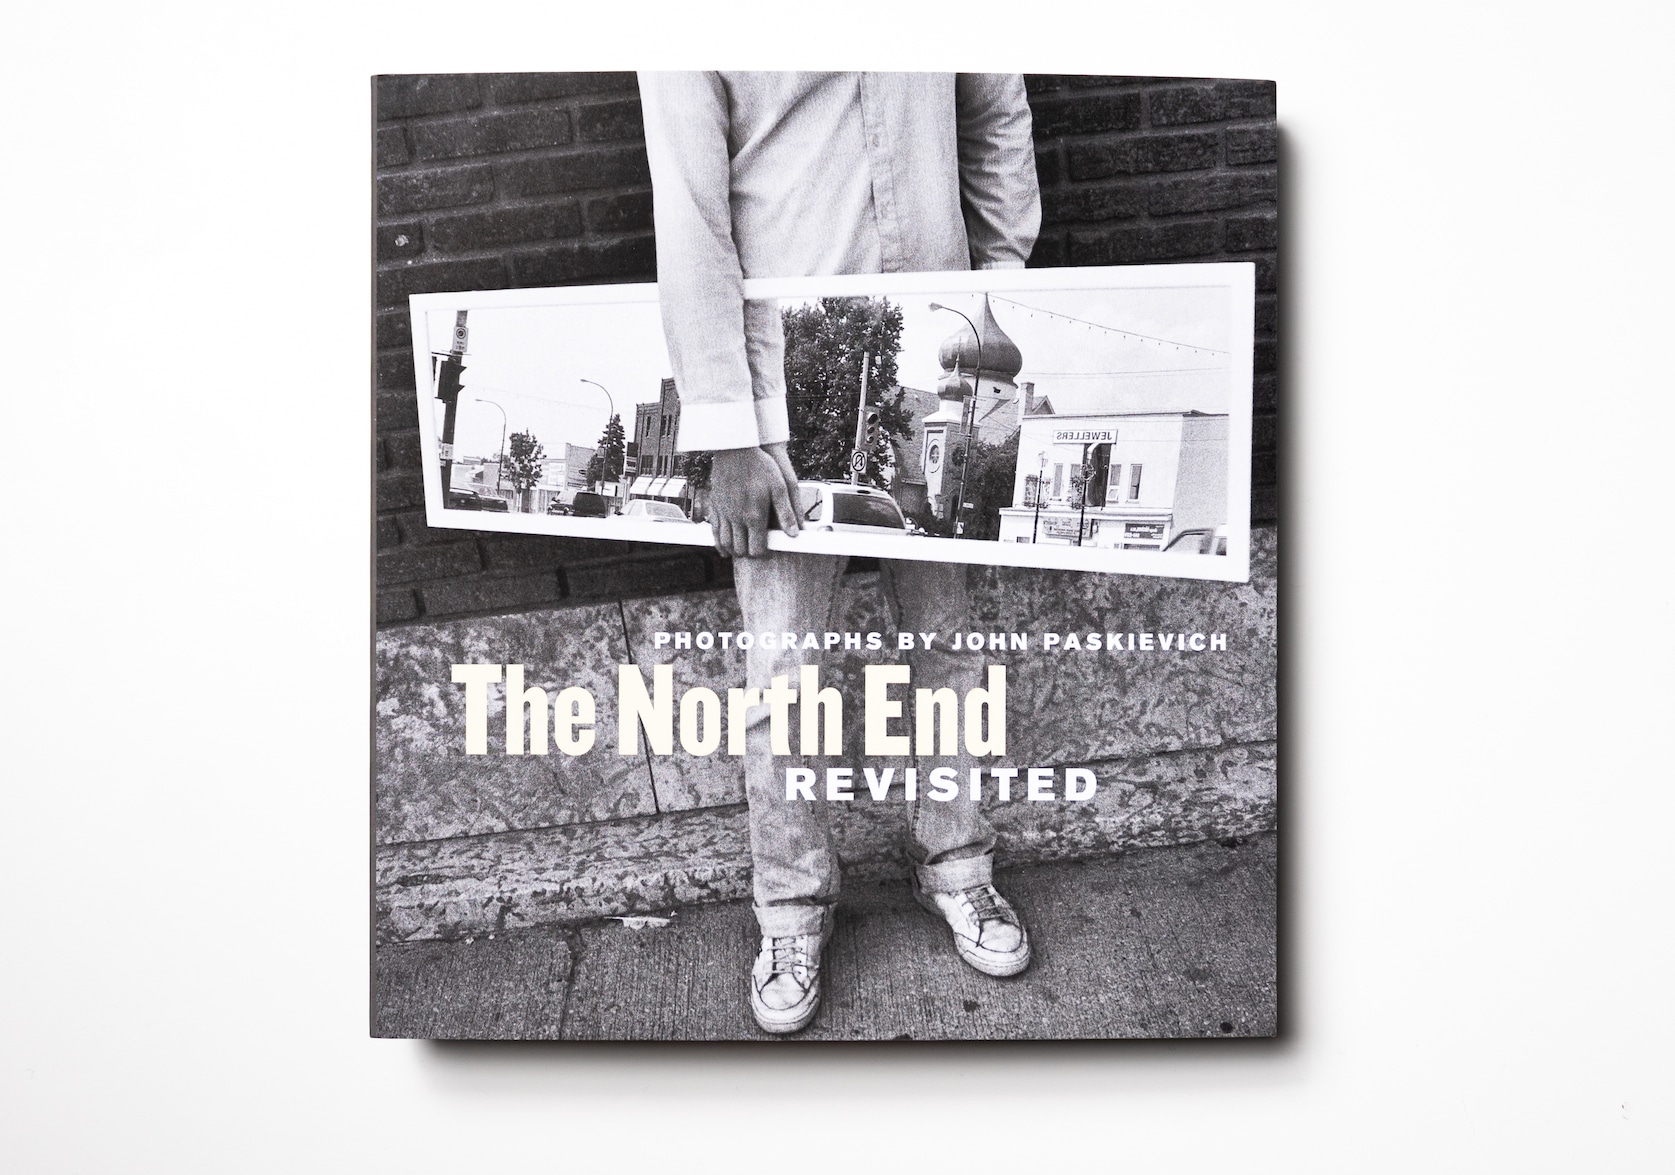 The North End Revisited: Photographs by John Paskievich